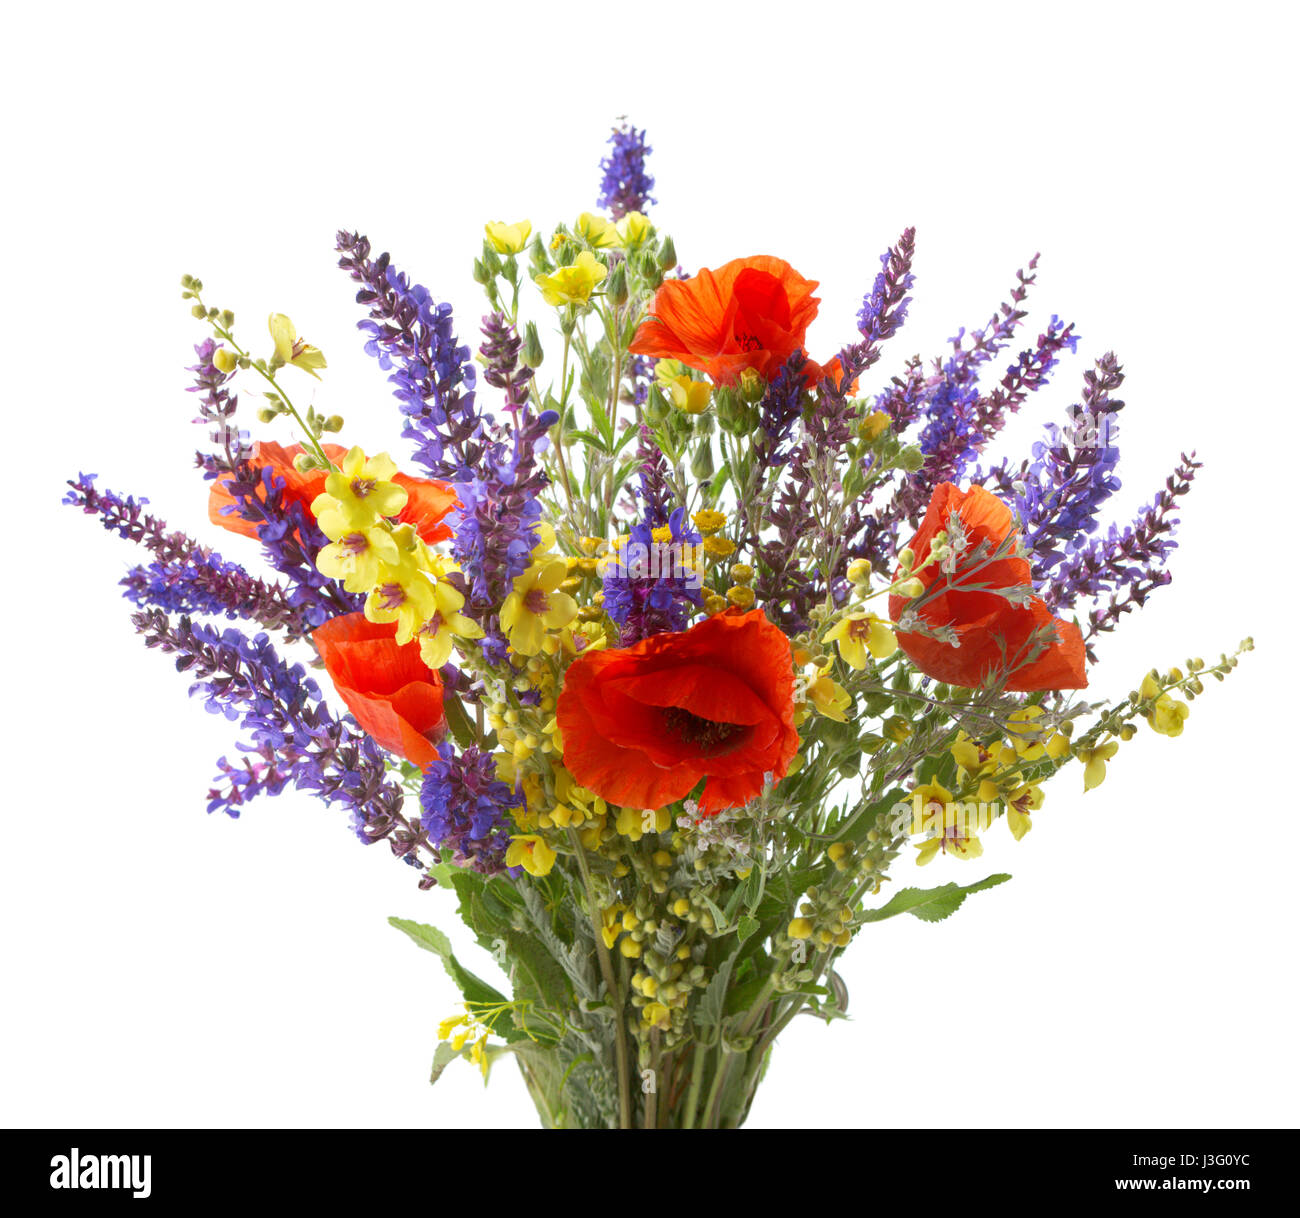 Colorful bouquet of red  poppies  and another  wildflowers (meadow sage, black mullein) isolated  on white. Stock Photo